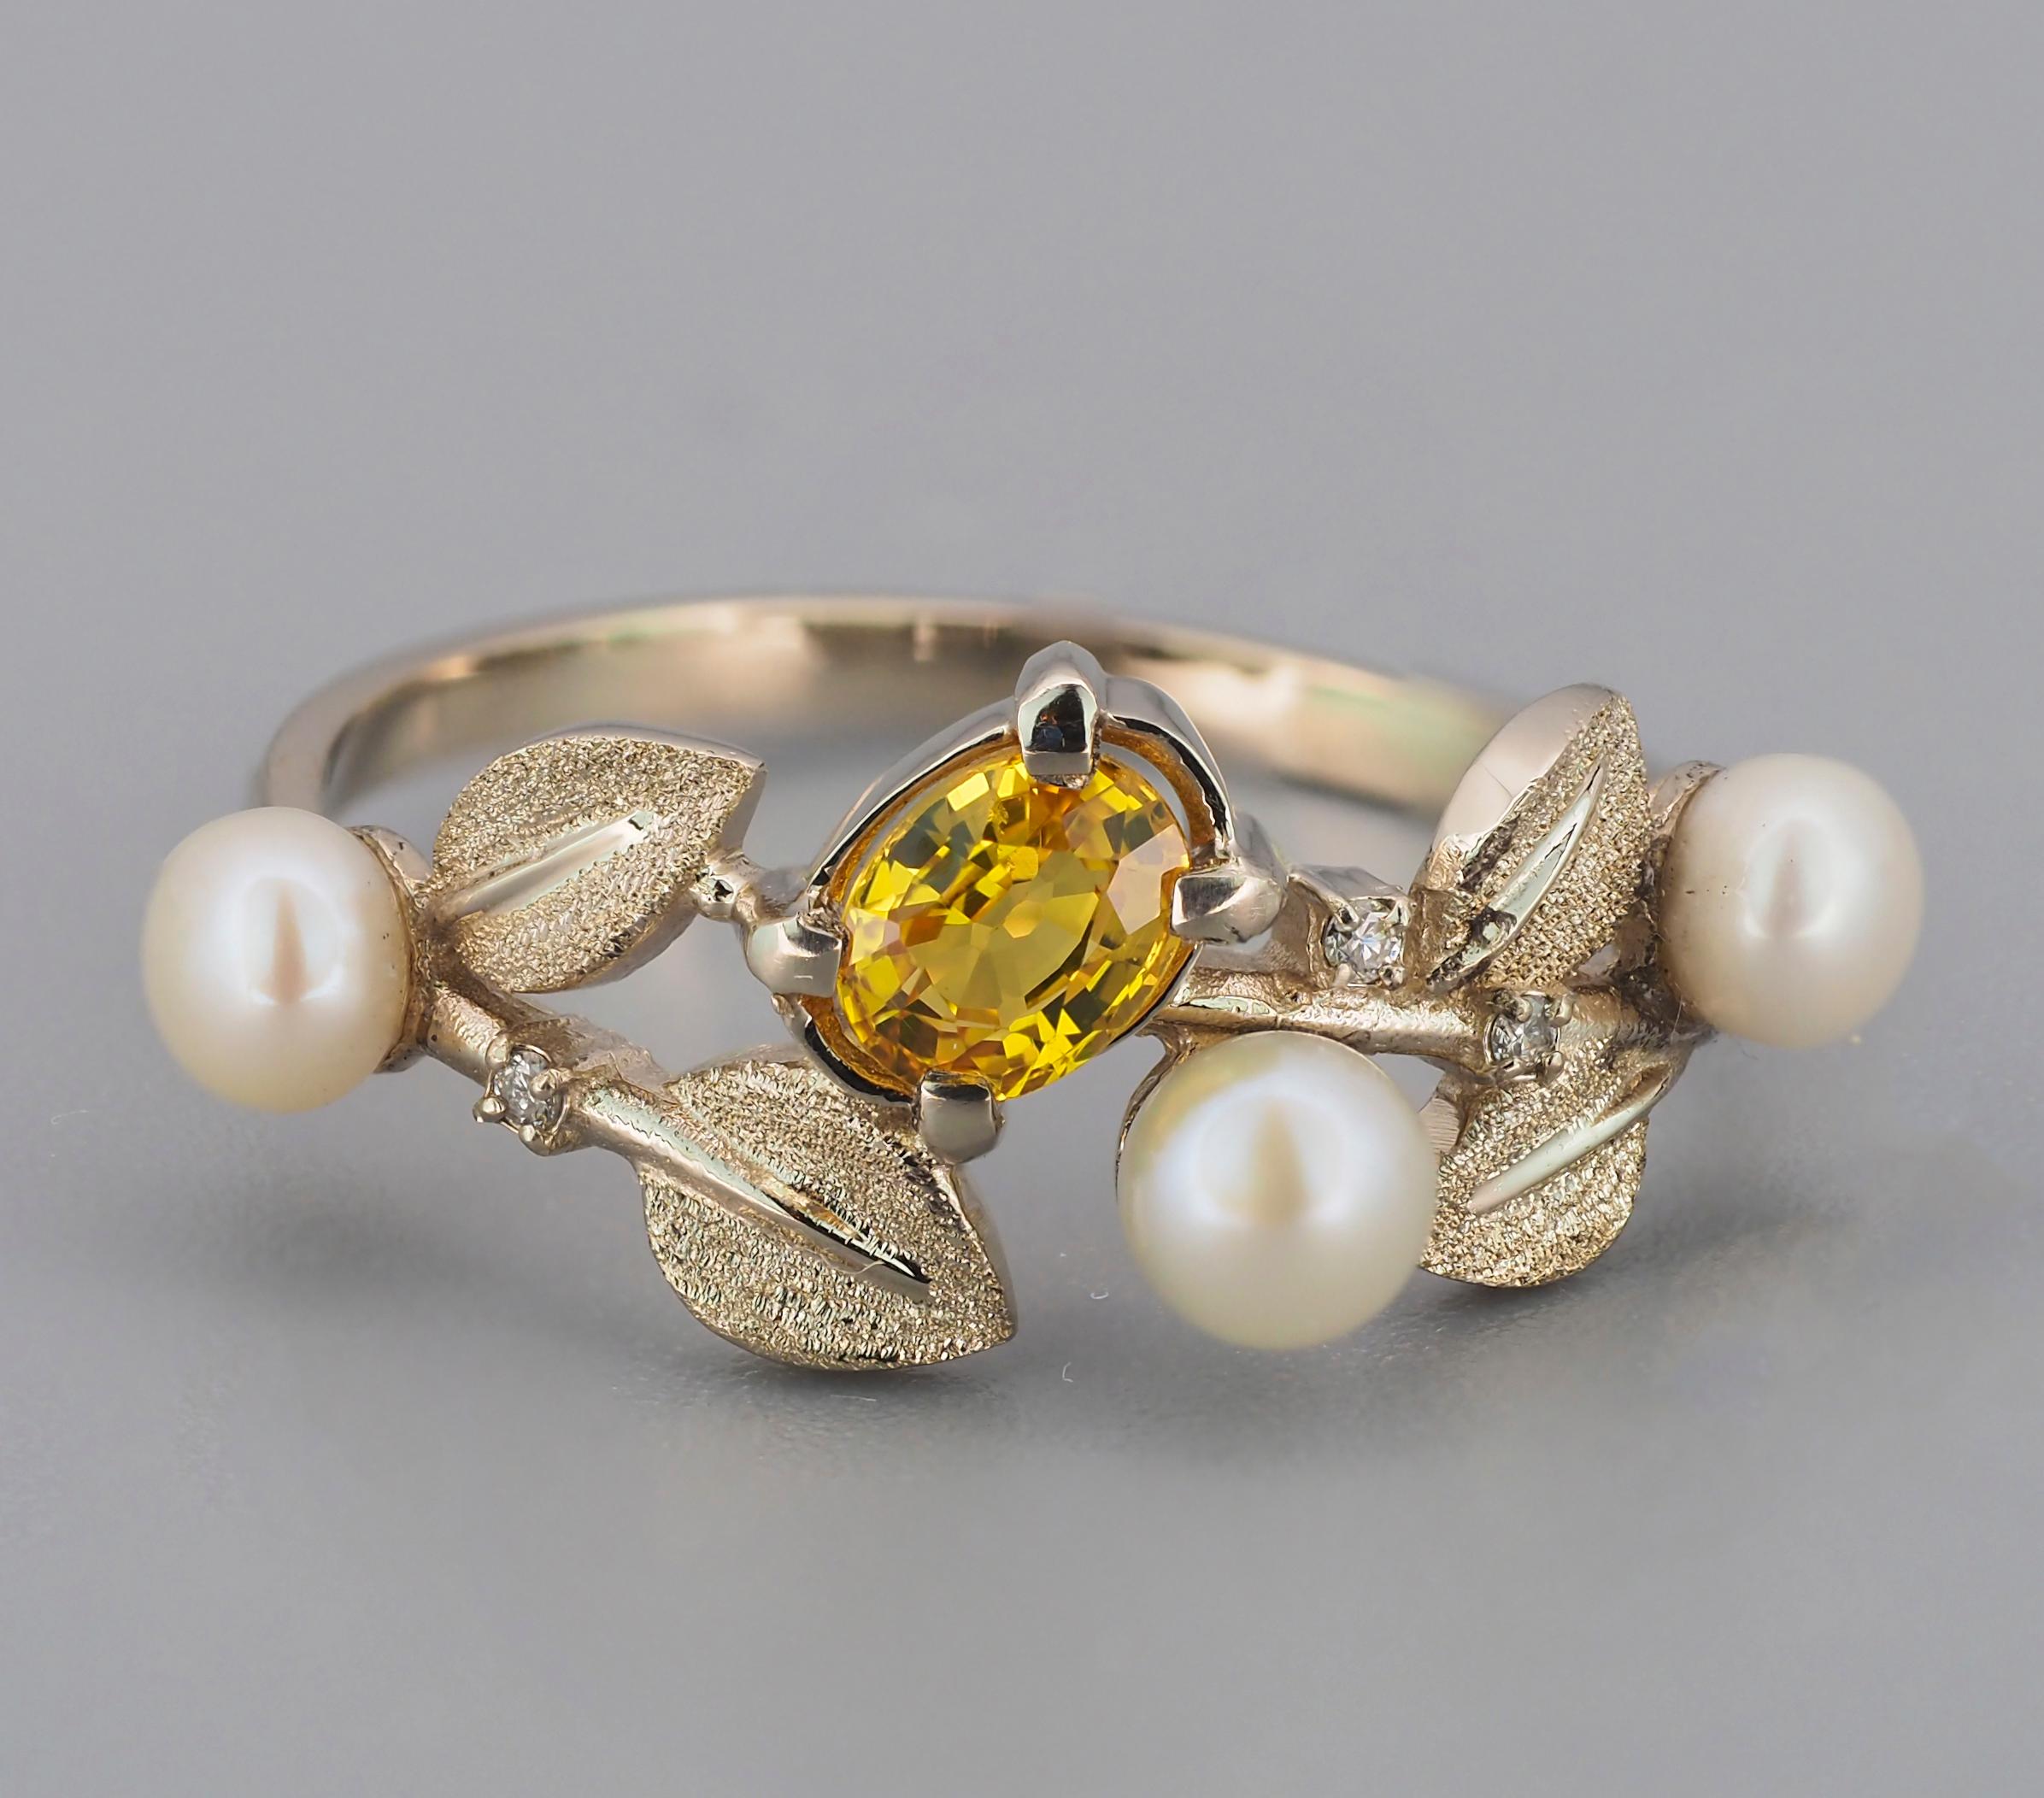 For Sale:  14k Gold Floral Ring with Sapphire, Diamonds and Pearls 2